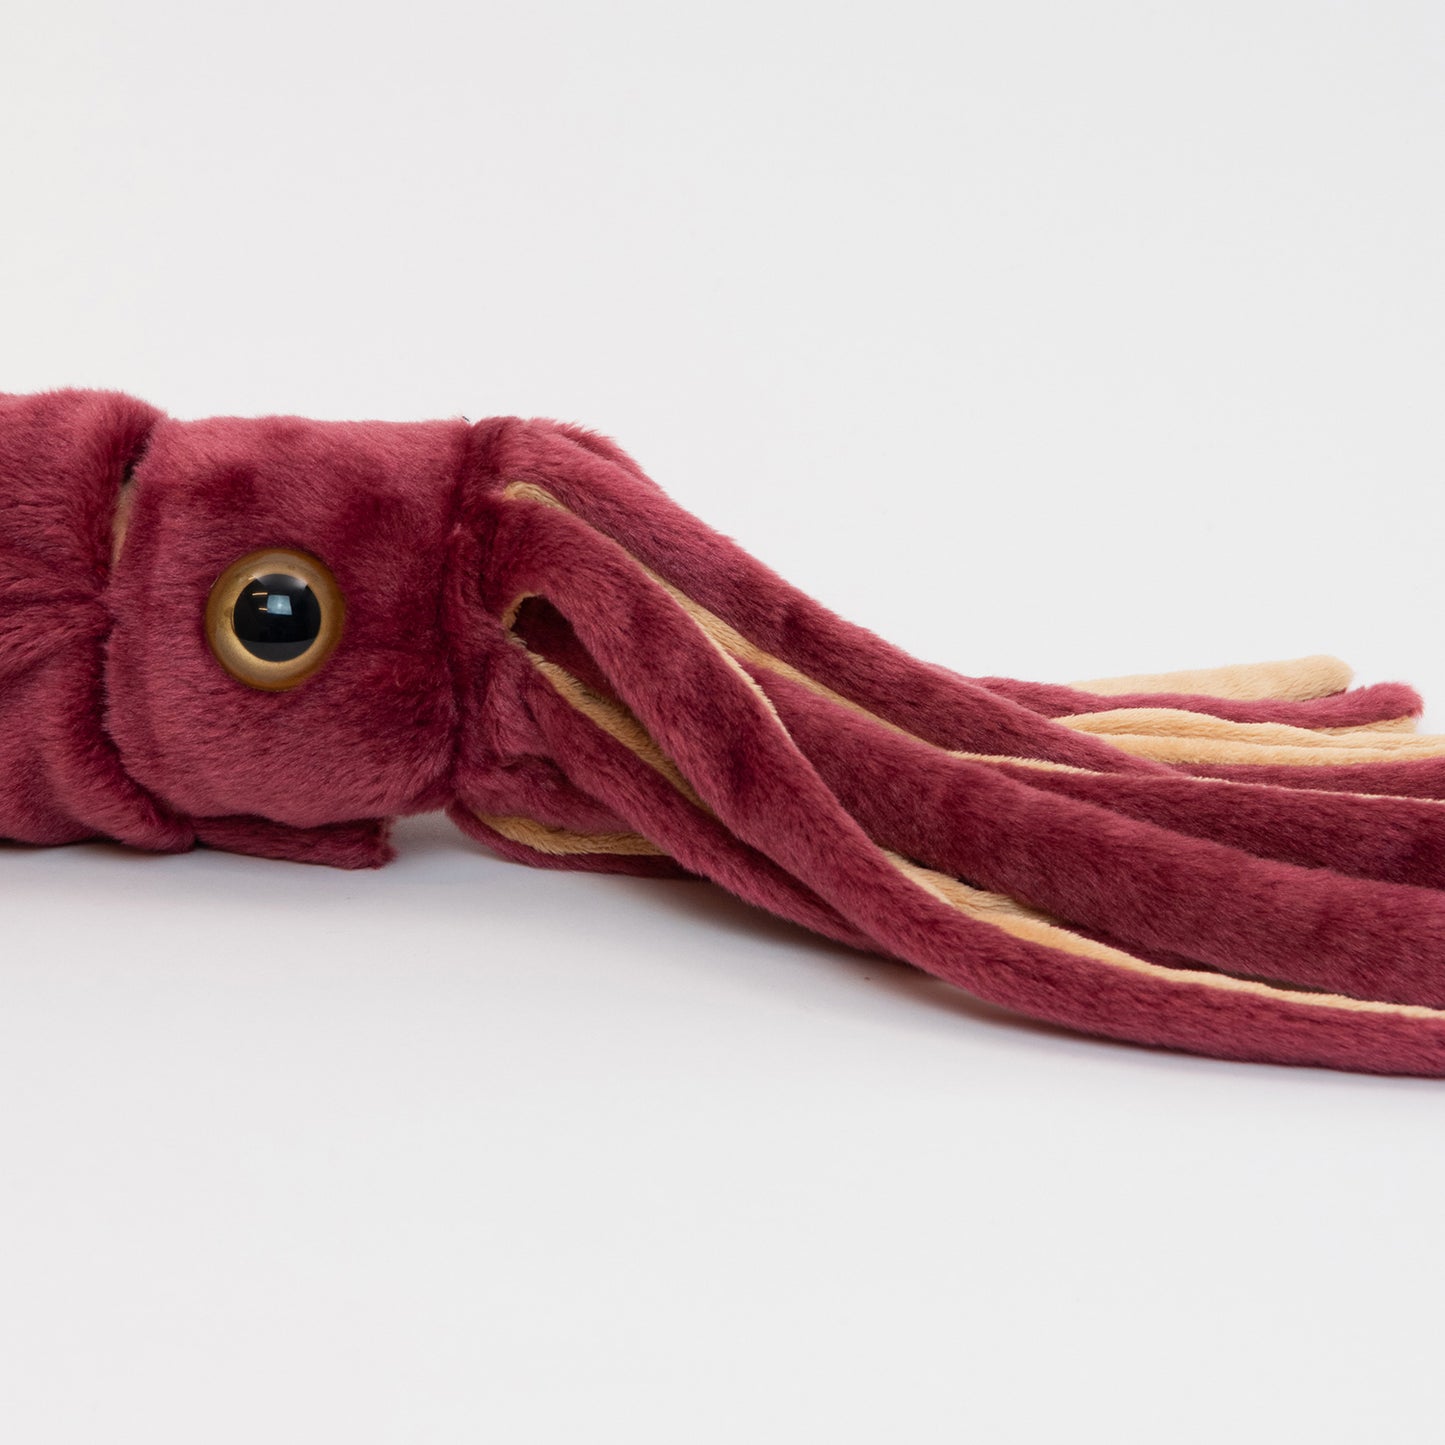 A red plush squid pictured on a white background.